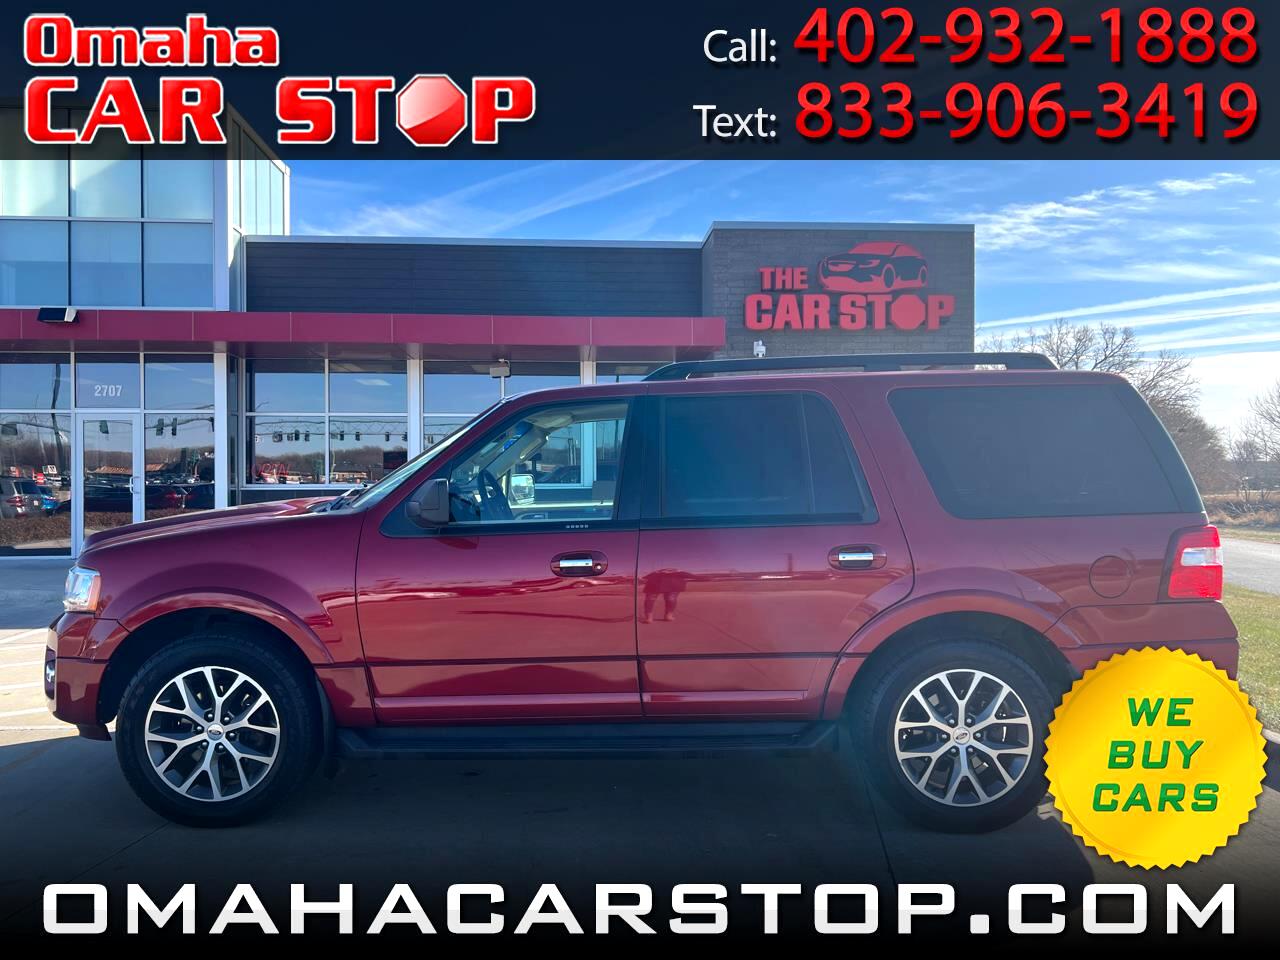 2015 Ford Expedition 4WD 4dr XLT